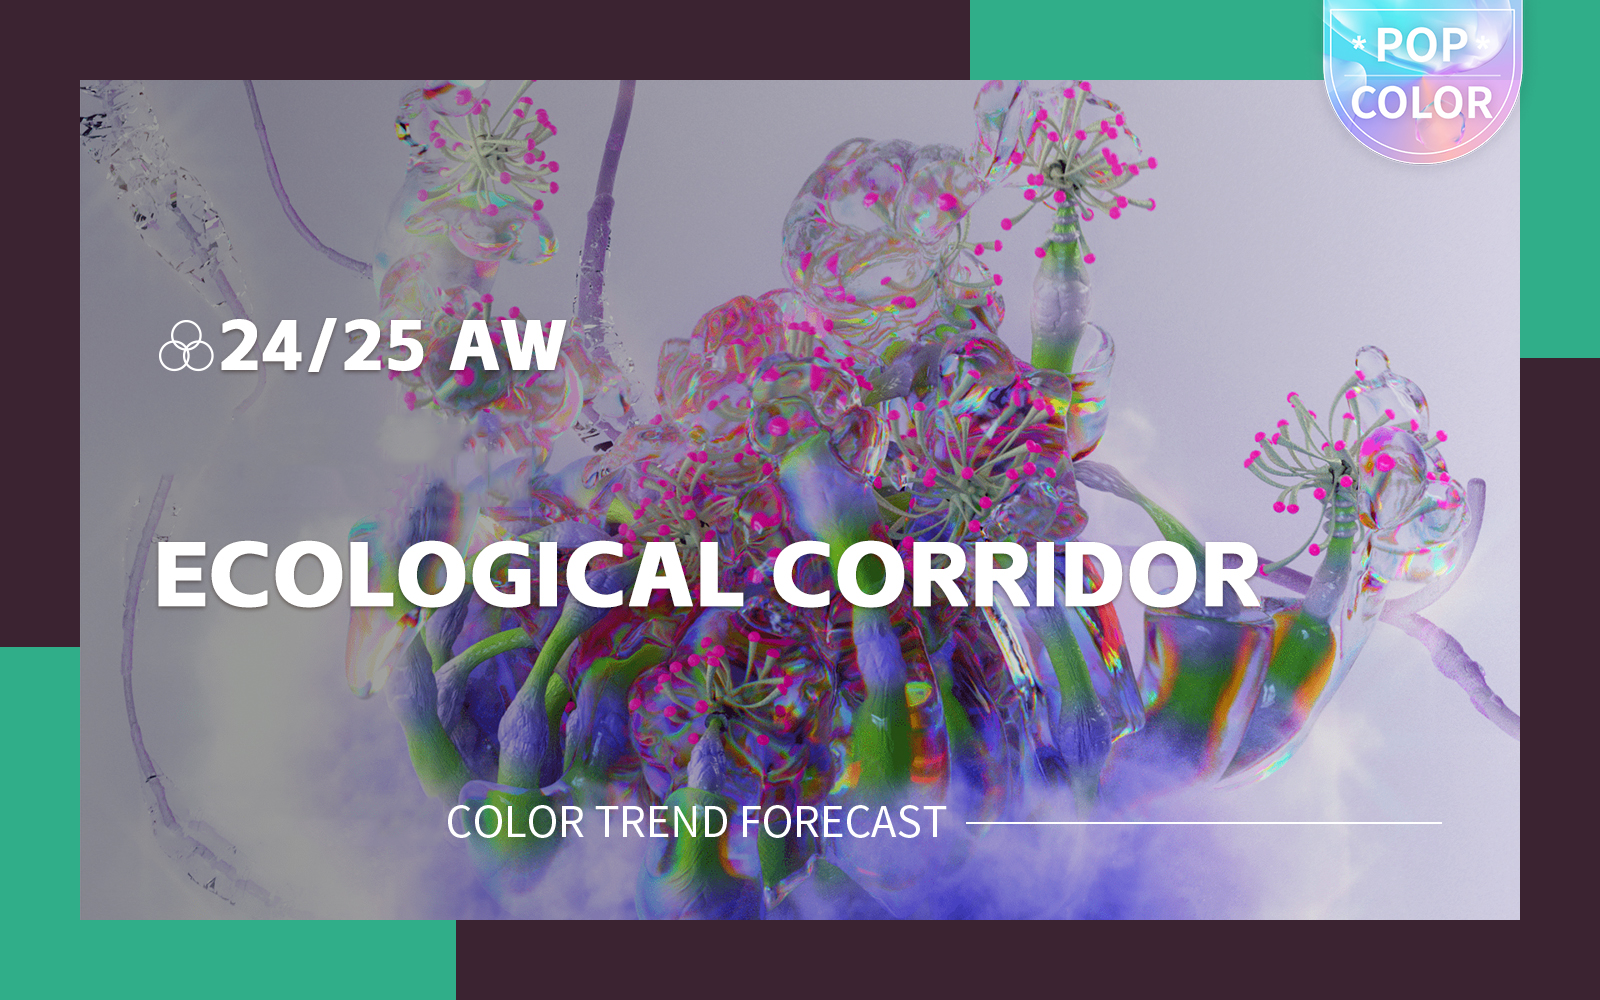 Ecological Corridor -- The A/W 24/25 Color Trend Forecast